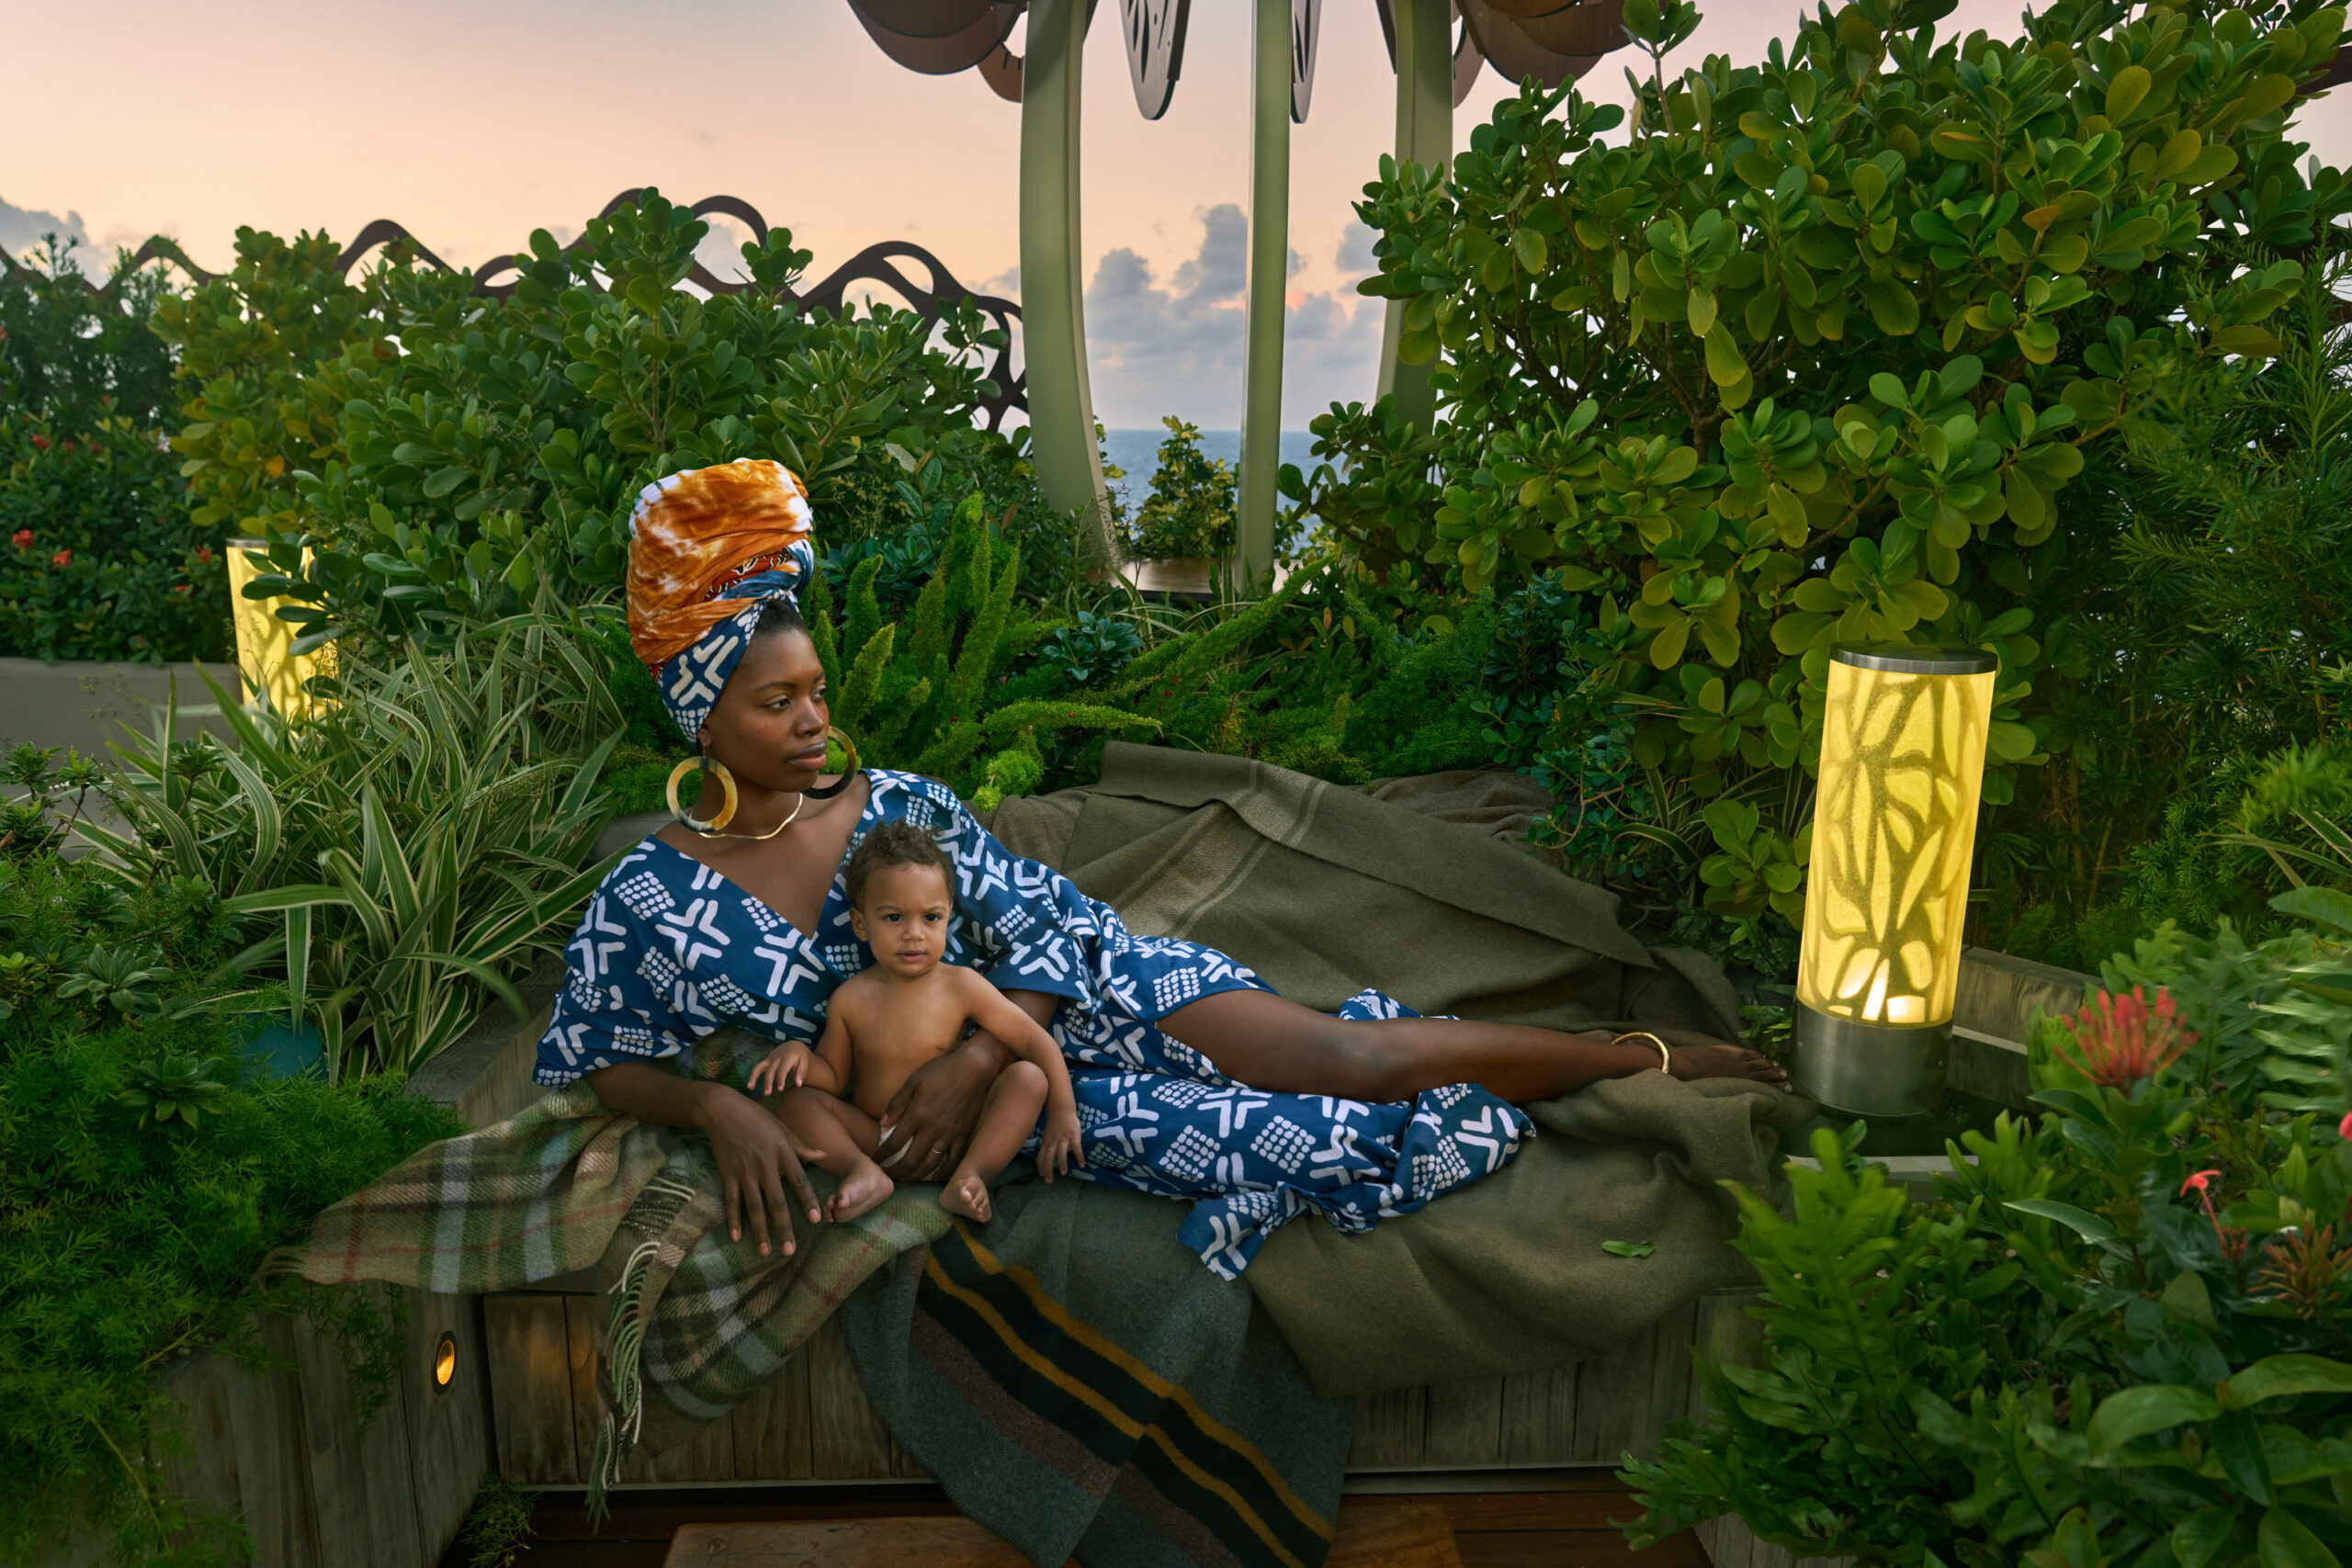 Haitian-born Paola Mathé – entrepreneur, creative director and creator of Fanm Djanm (which means “strong woman” in Haitian Creole) – lounges with her son in the Rooftop Garden onboard Celebrity Apex. (Photo Credit: Annie Leibovitz / Celebrity Cruises / AIPP)